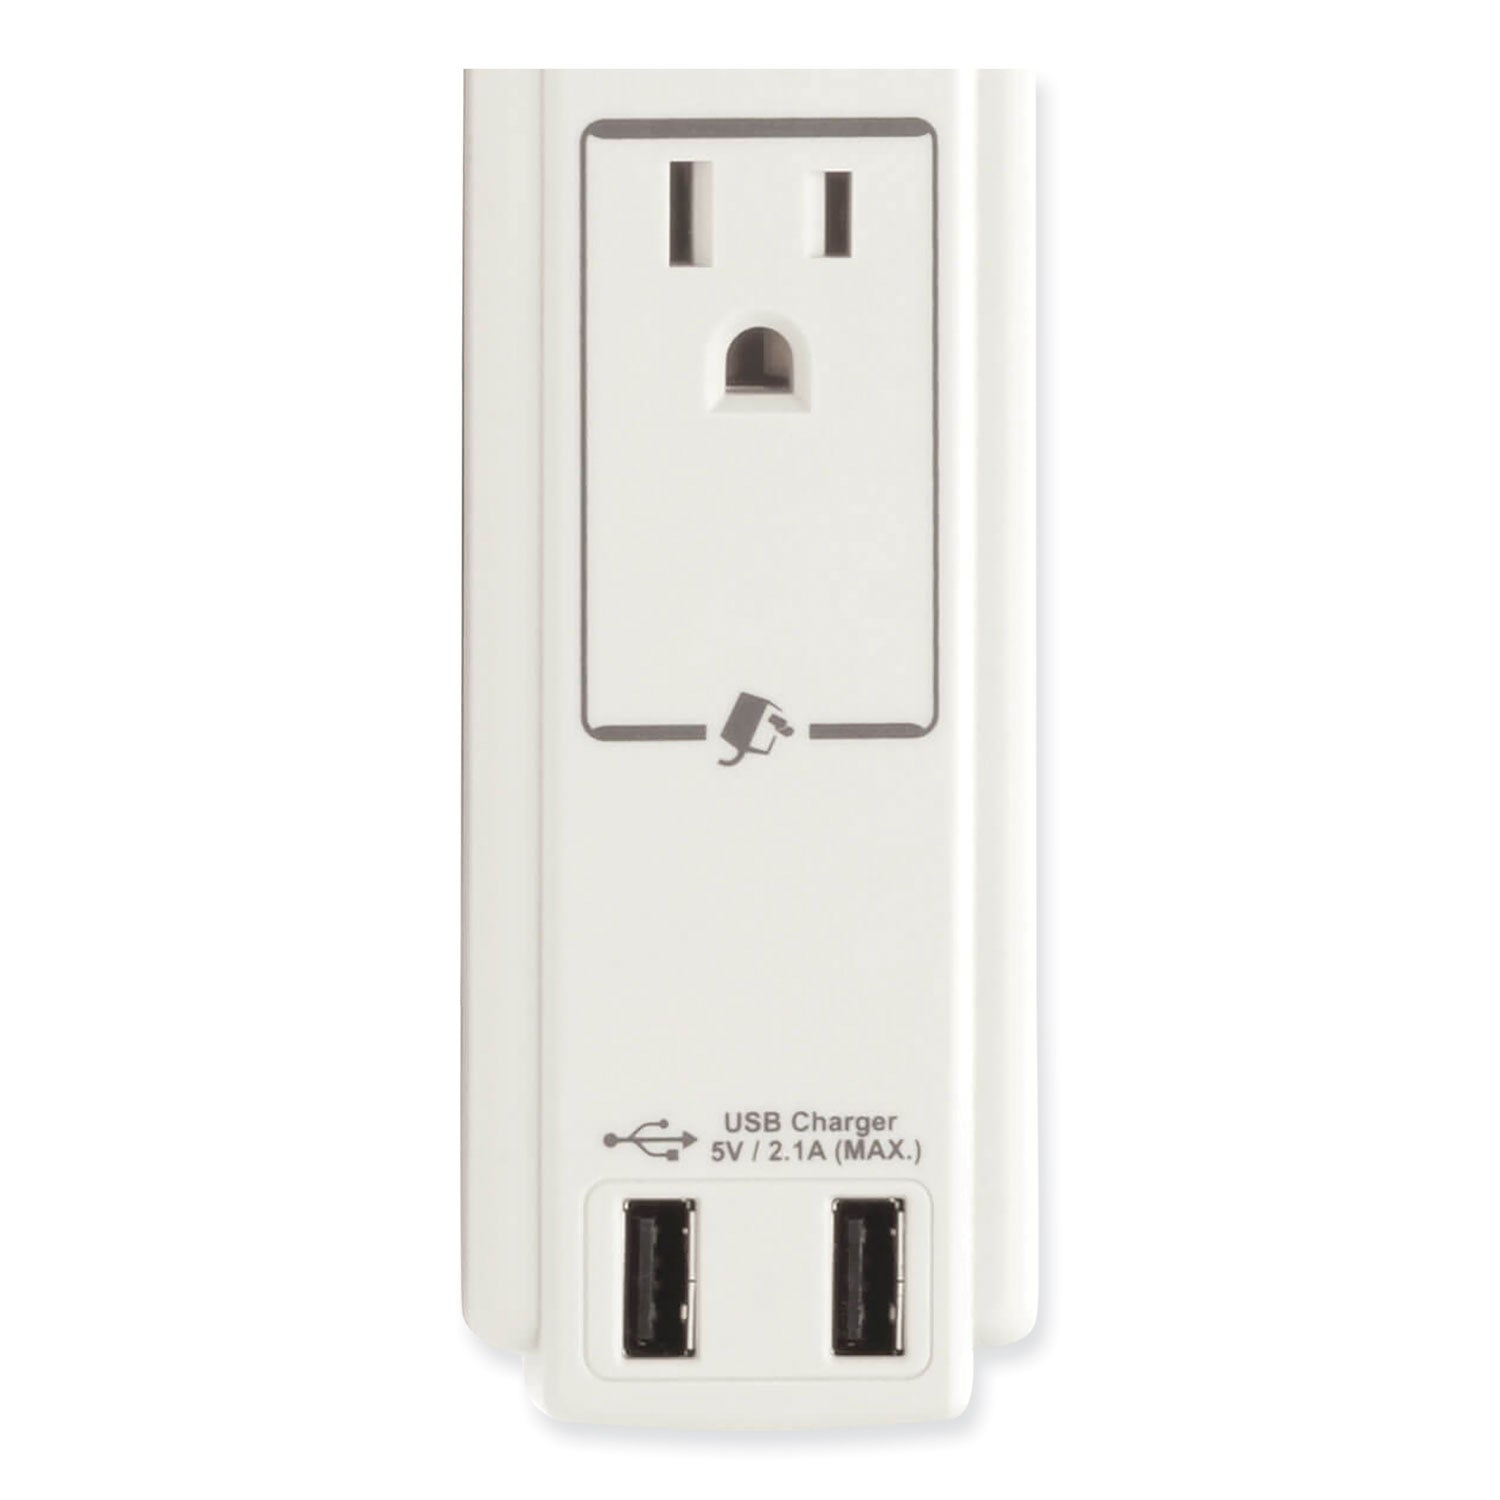 Protect It! Surge Protector, 6 AC Outlets/2 USB Ports, 6 ft Cord, 990 J, Cool Gray - 